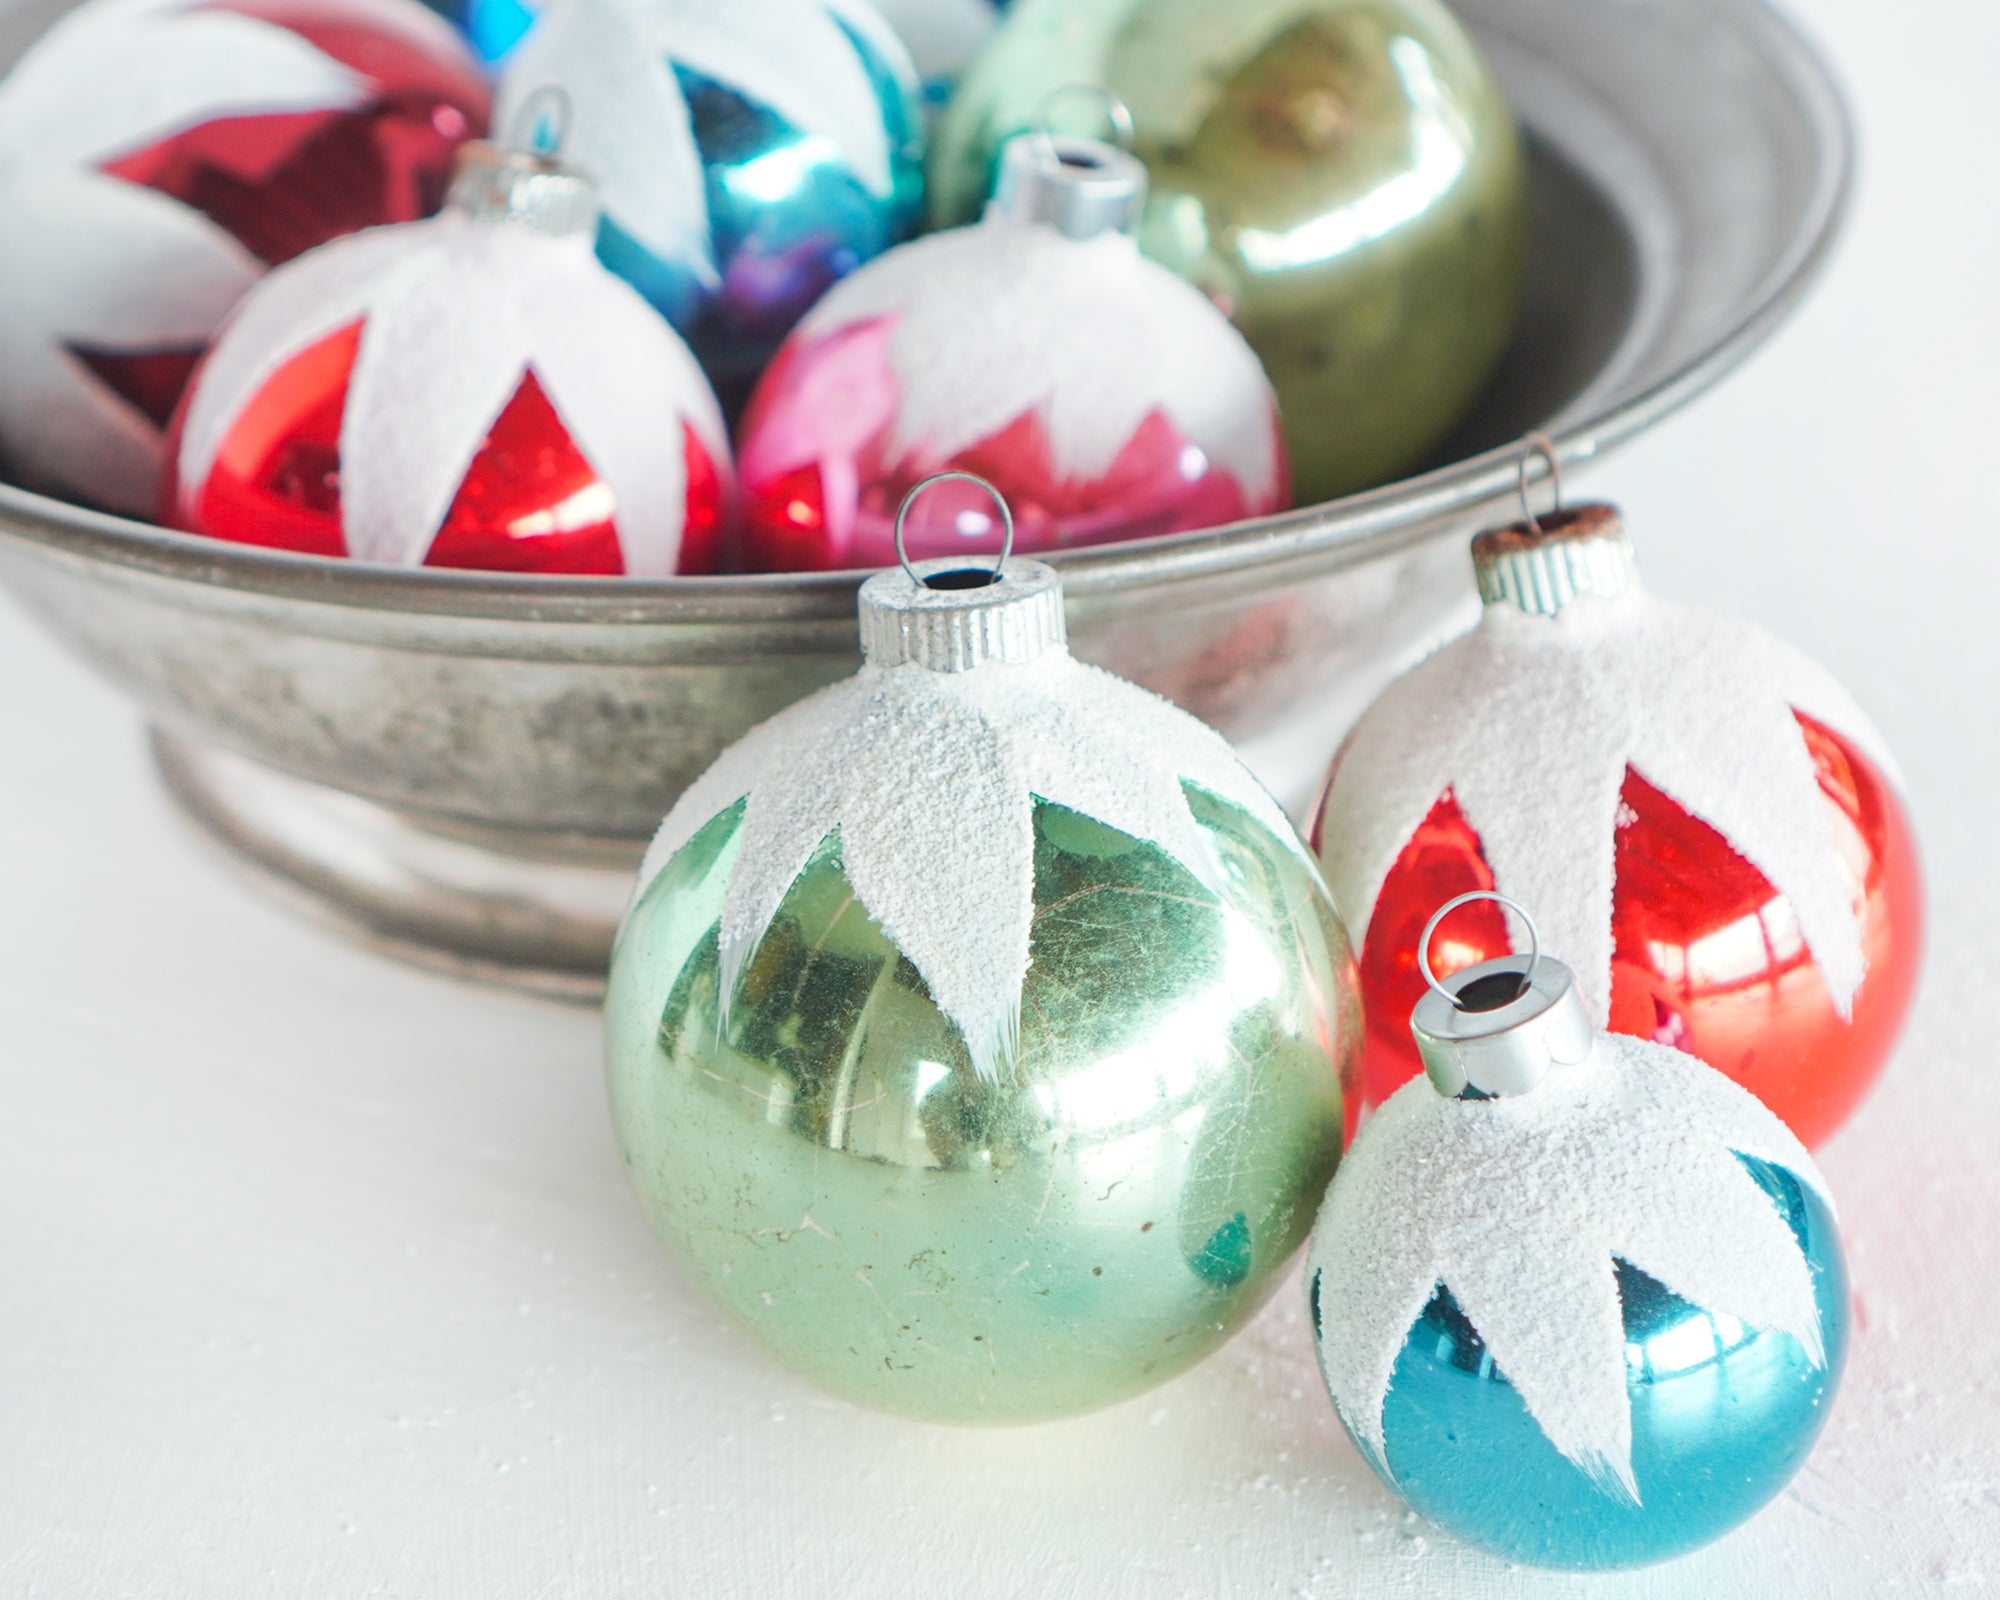 Snow Cap Christmas Ornaments - Embellishing Mercury Glass Balls with Paint and Glitter